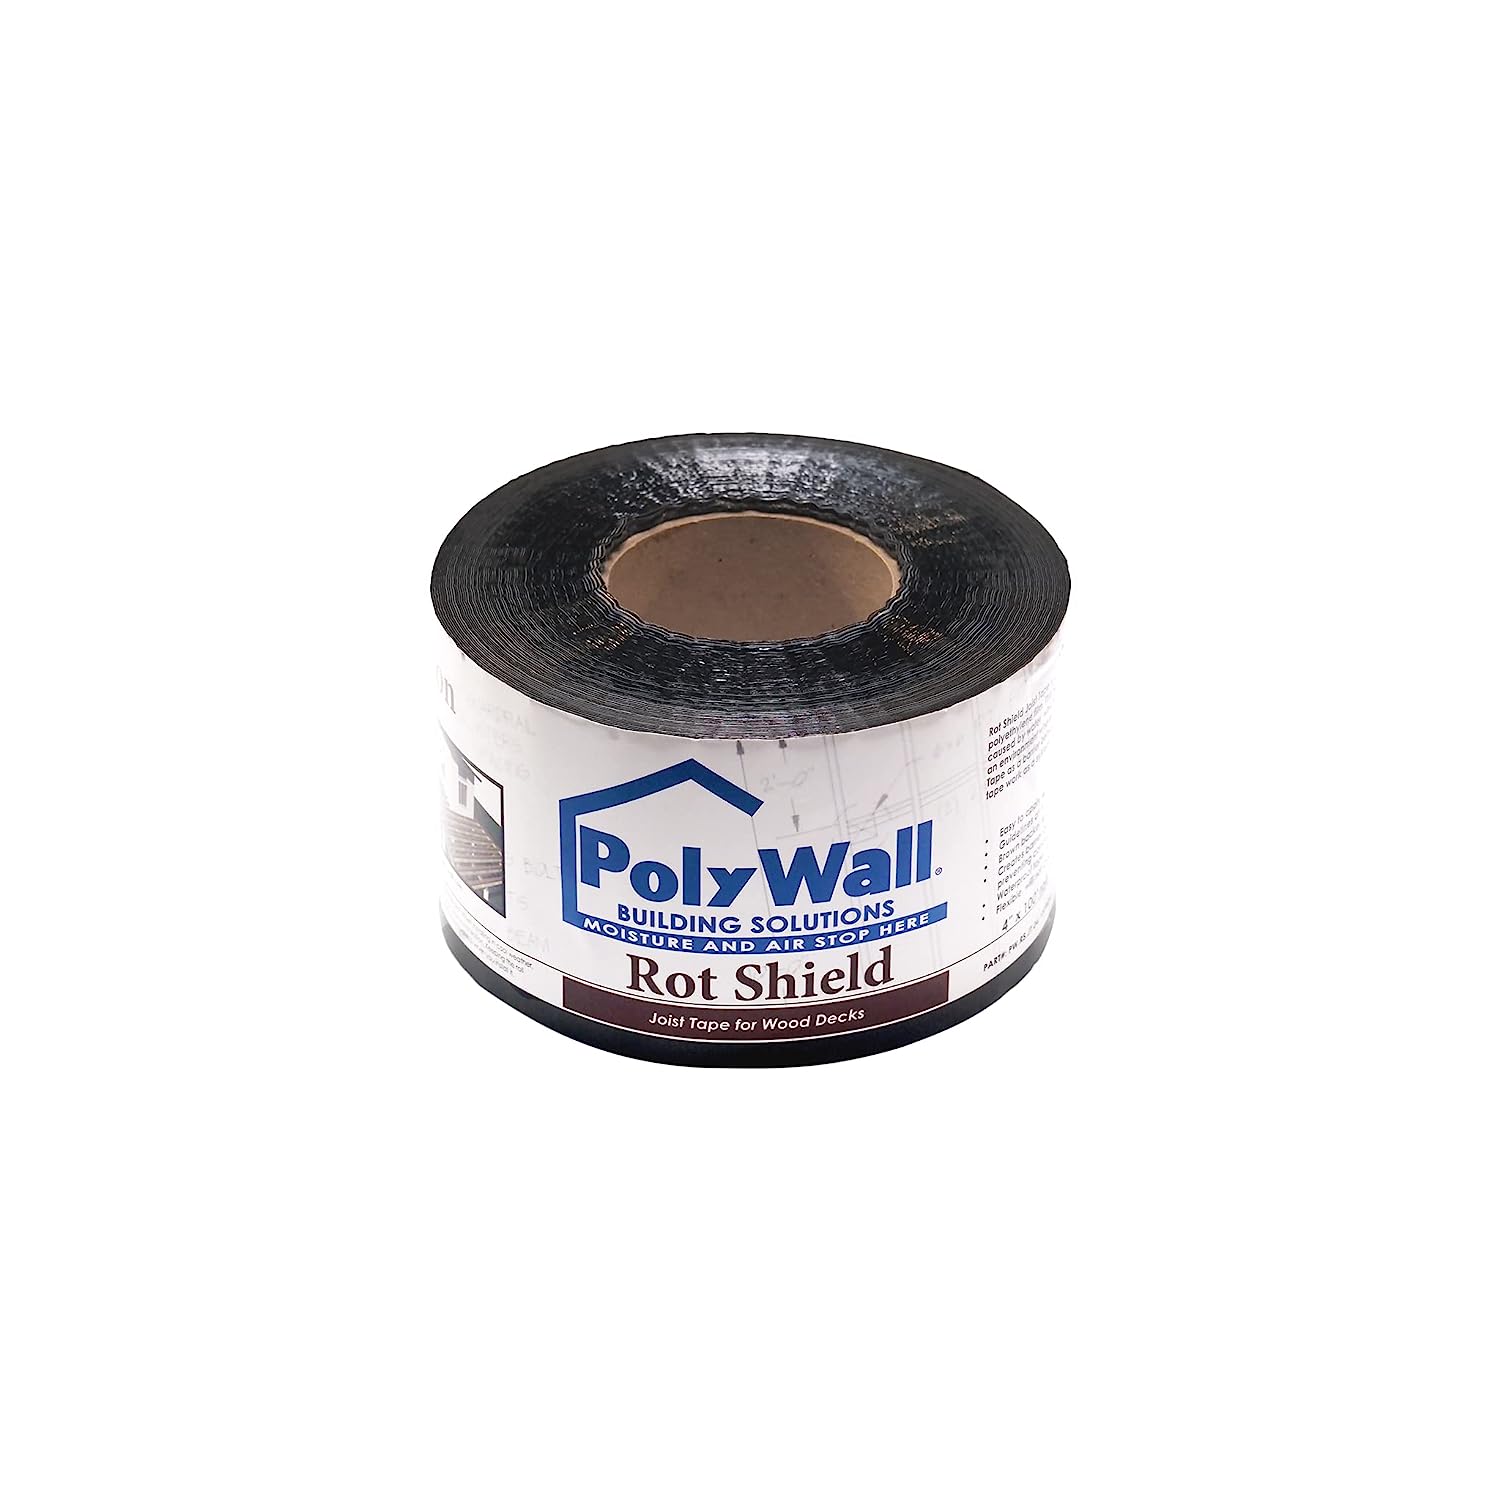 POLYGUARD Poly Wall - Rot Shield Joist Tape for [...]